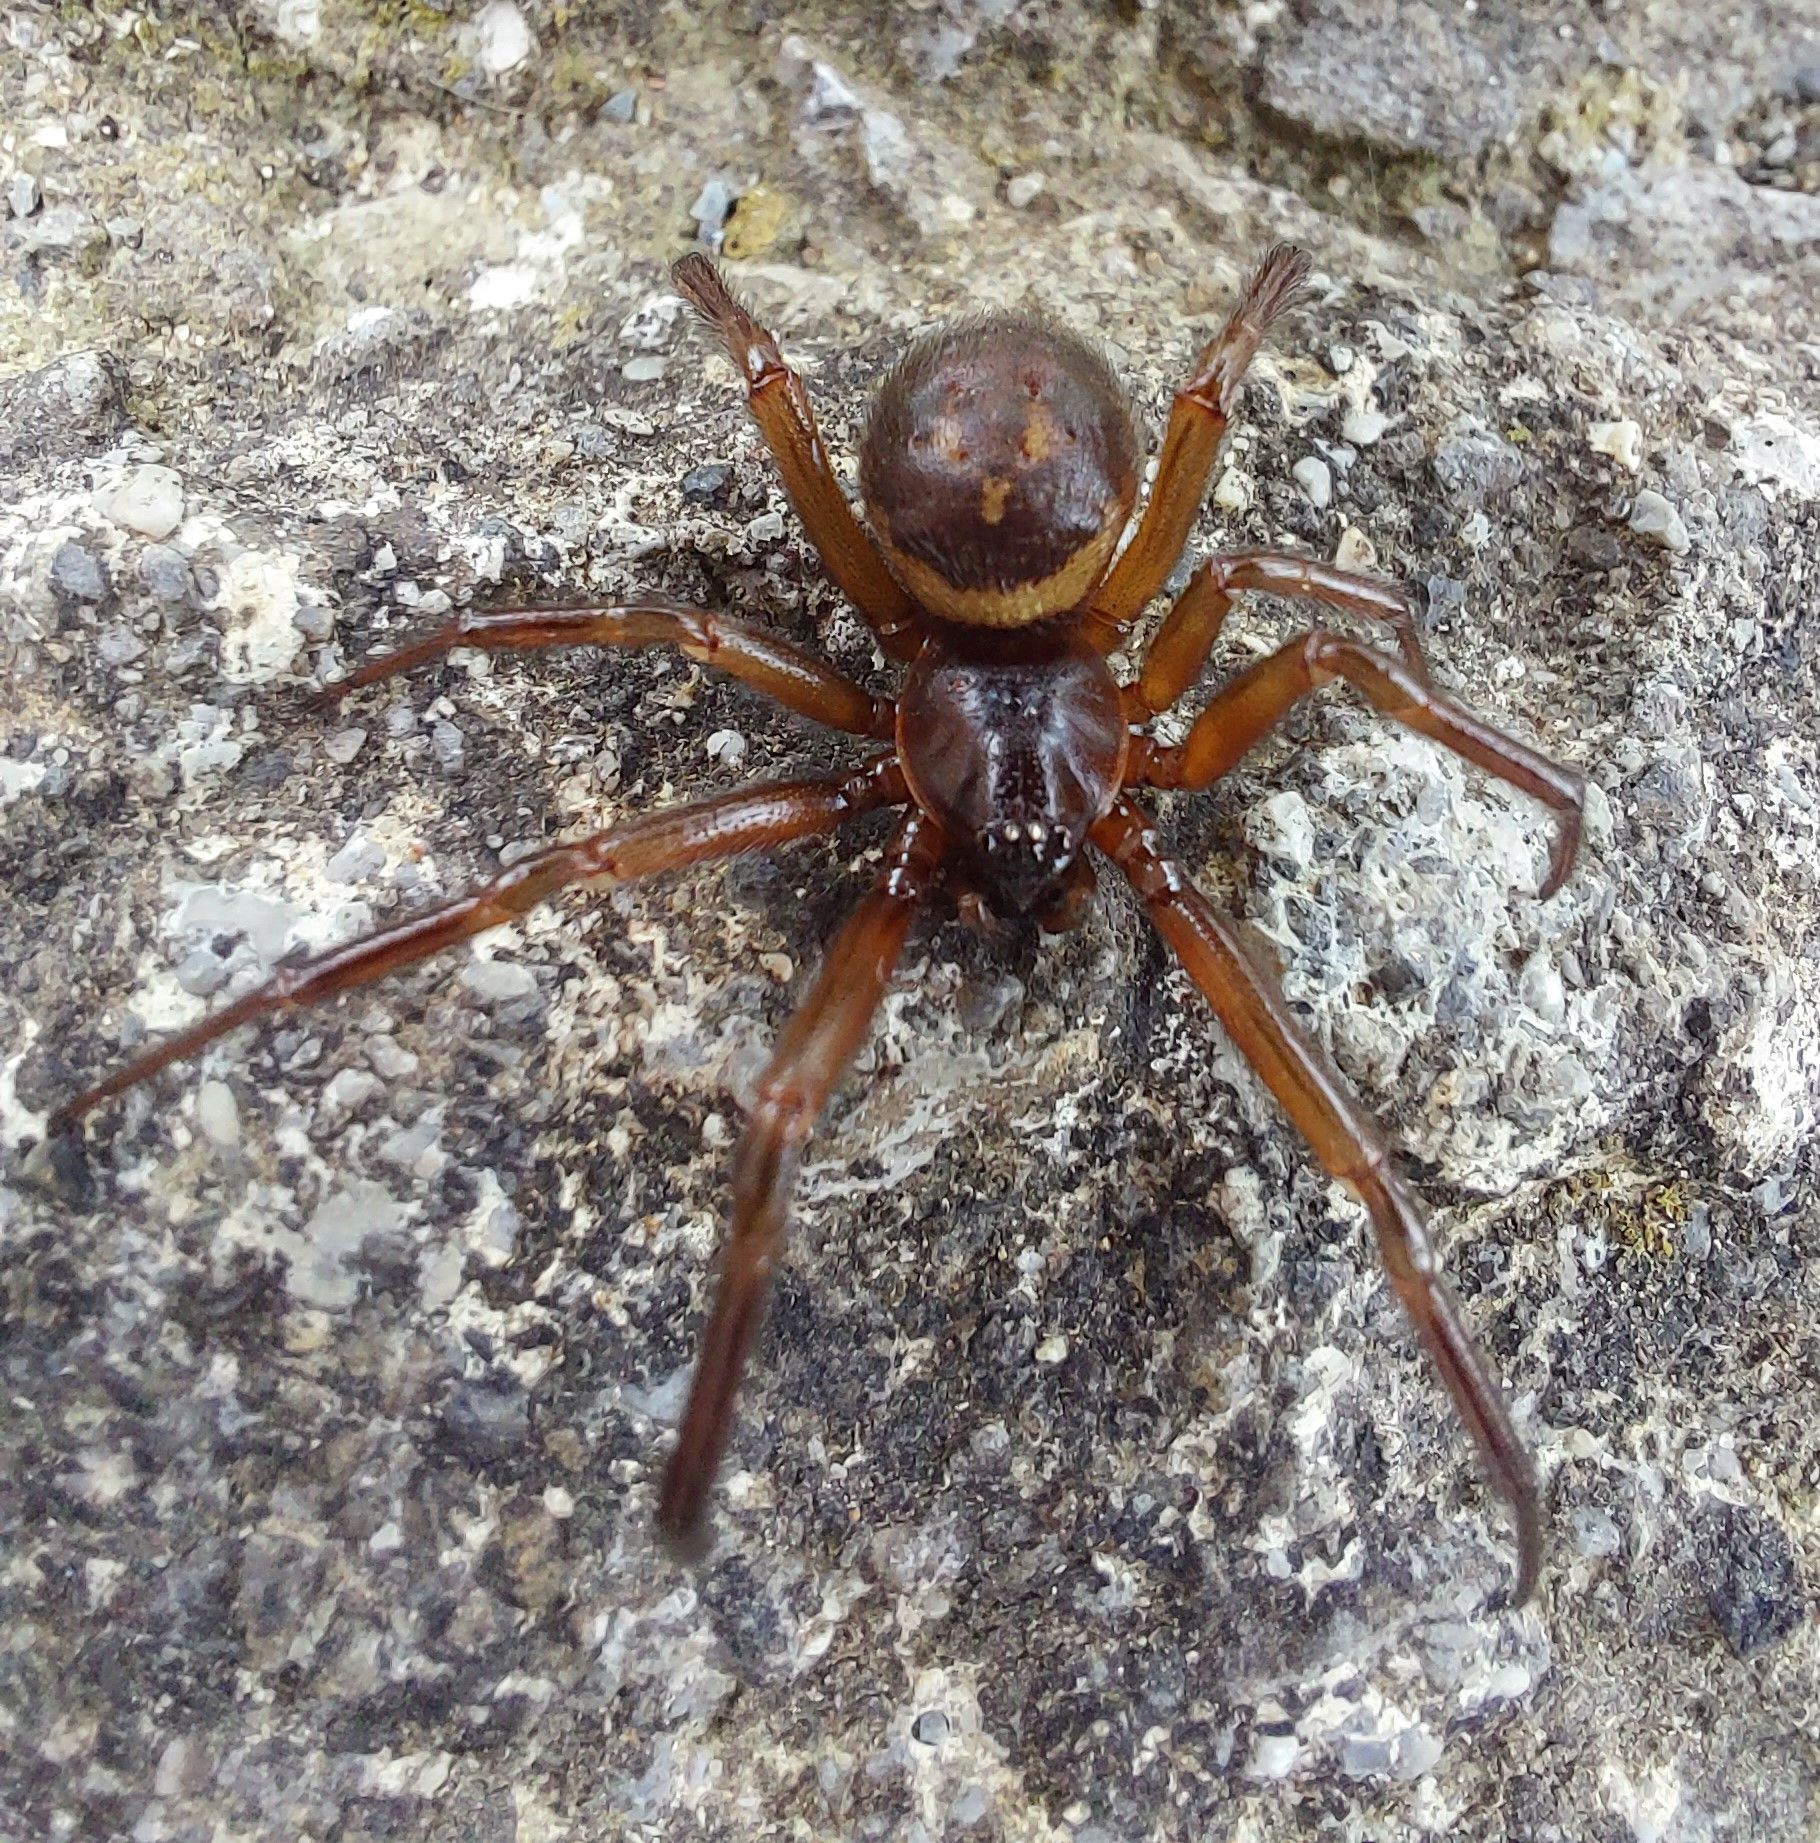 A SLOW END: The false widow is recognisable by its bulbous body and its distinctive ‘skull’ marking